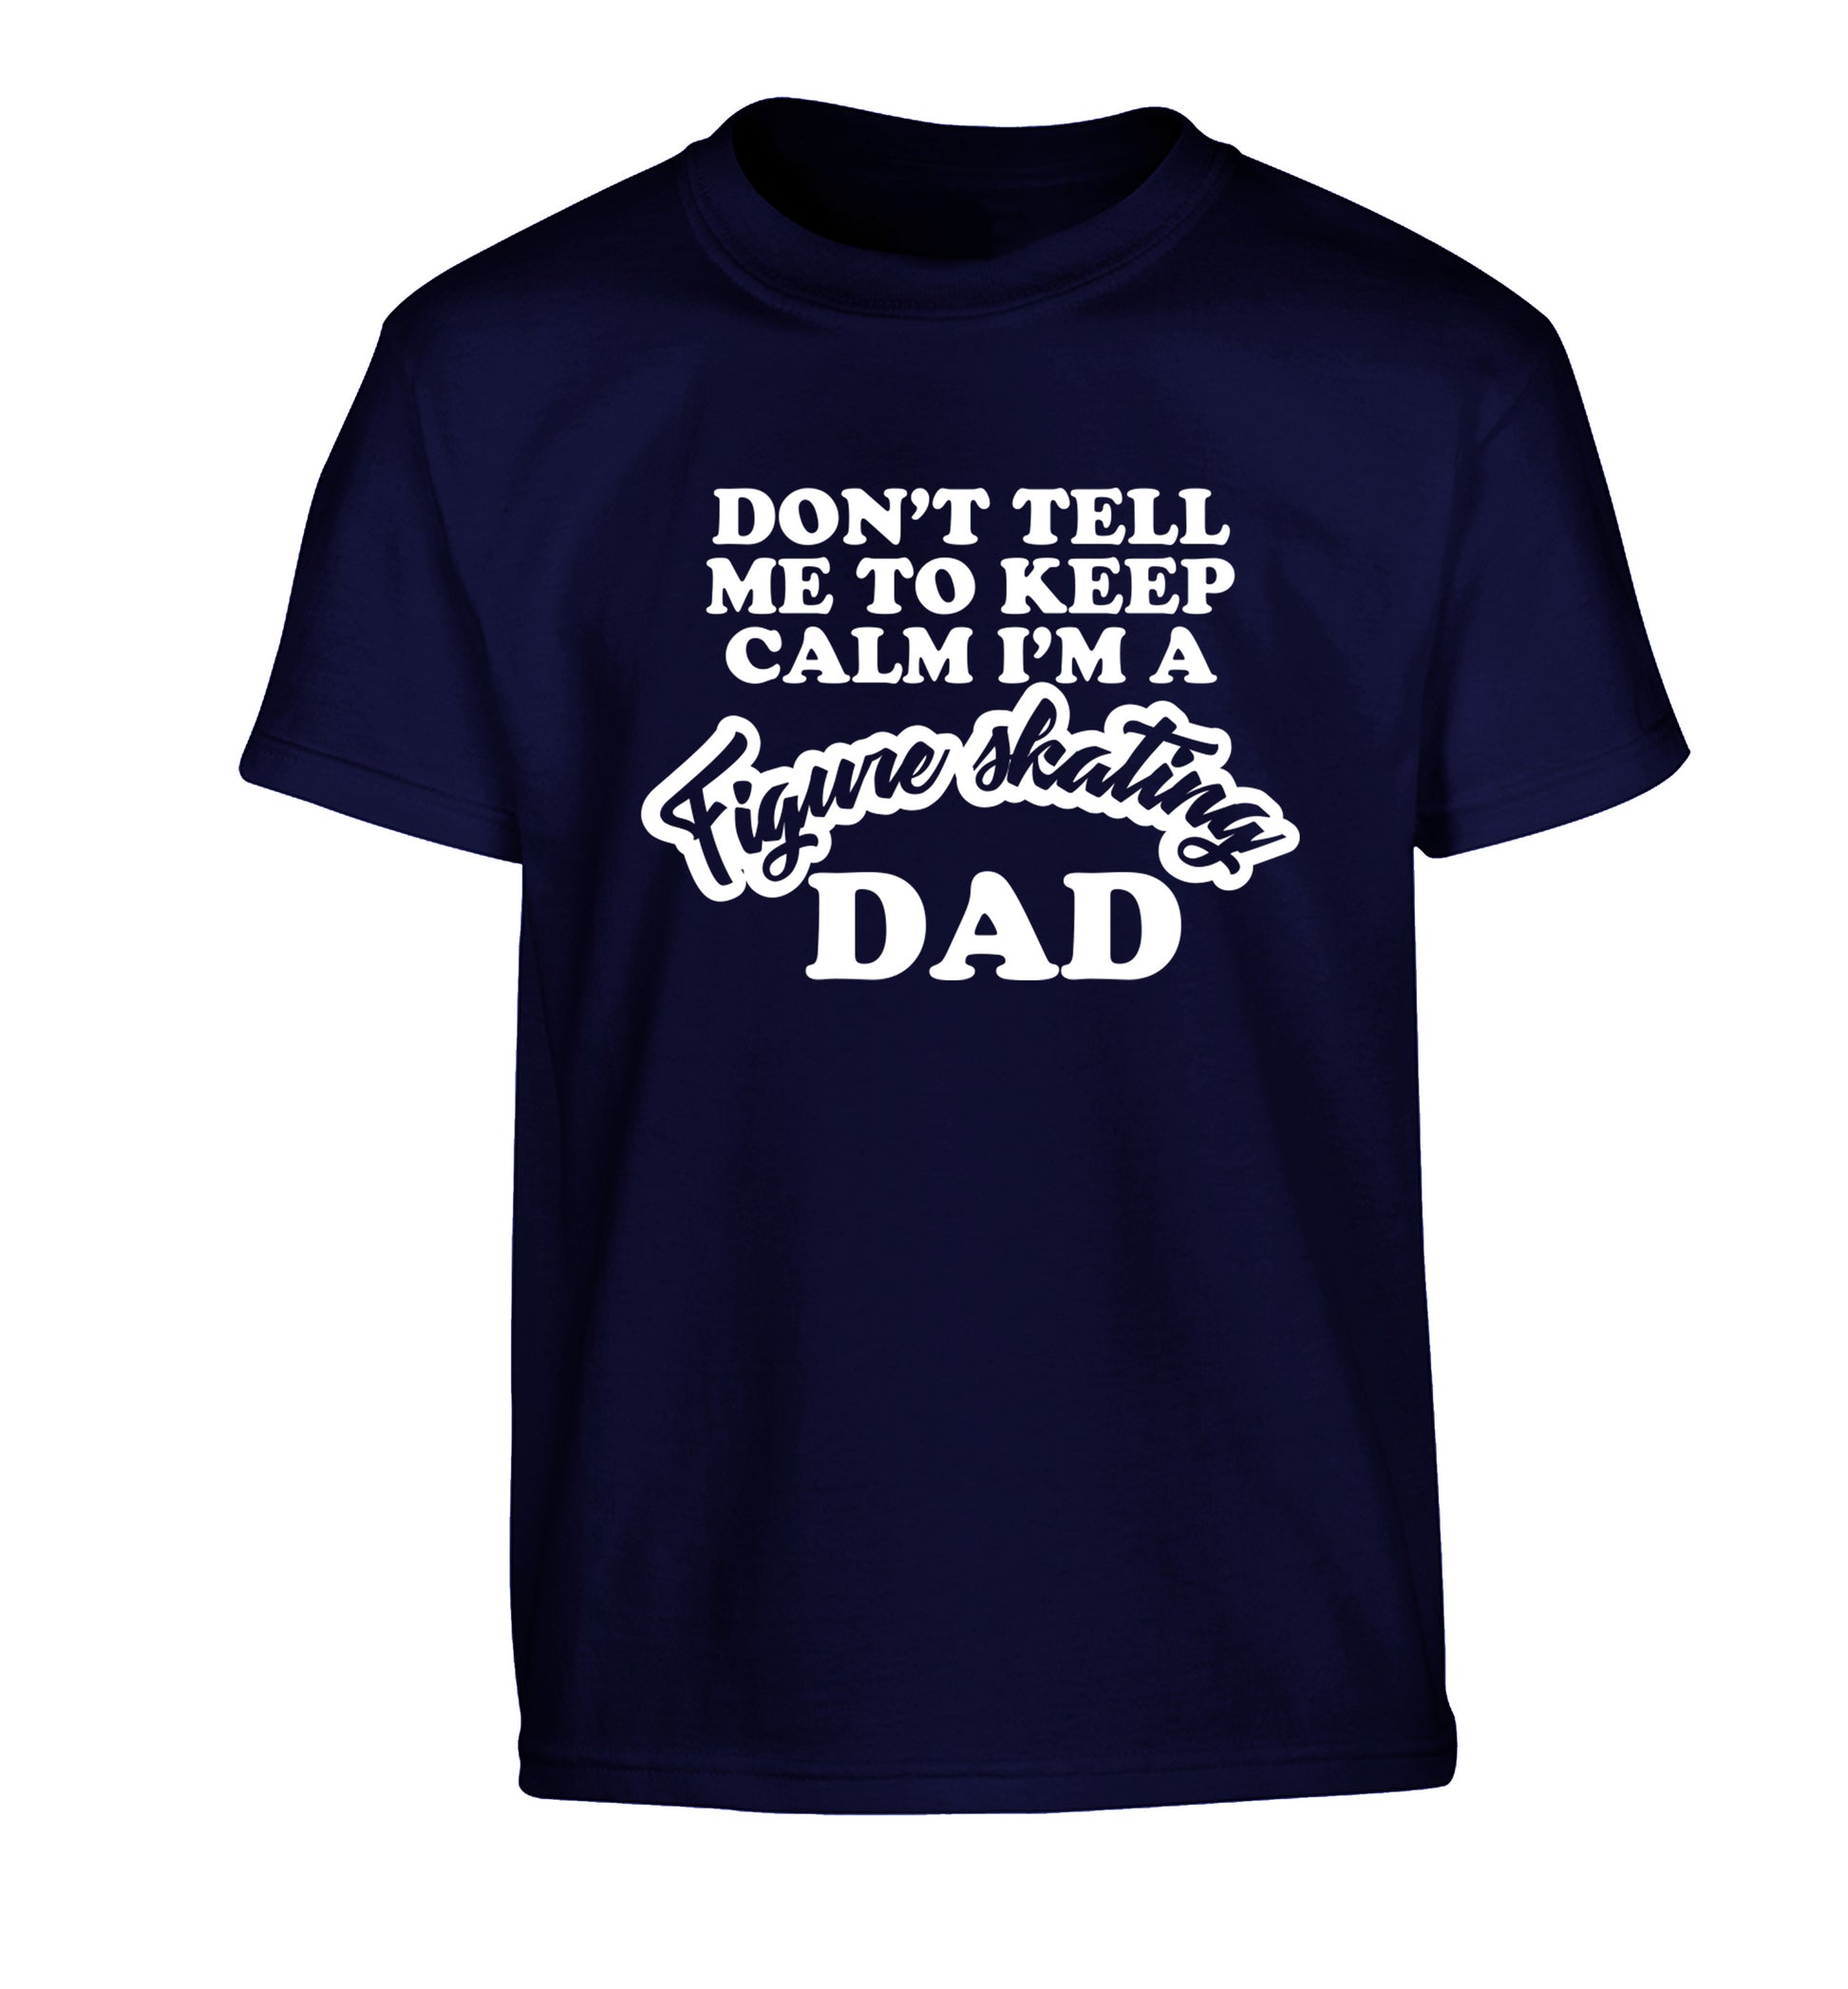 Don't tell me to keep calm I'm a figure skating dad Children's navy Tshirt 12-14 Years